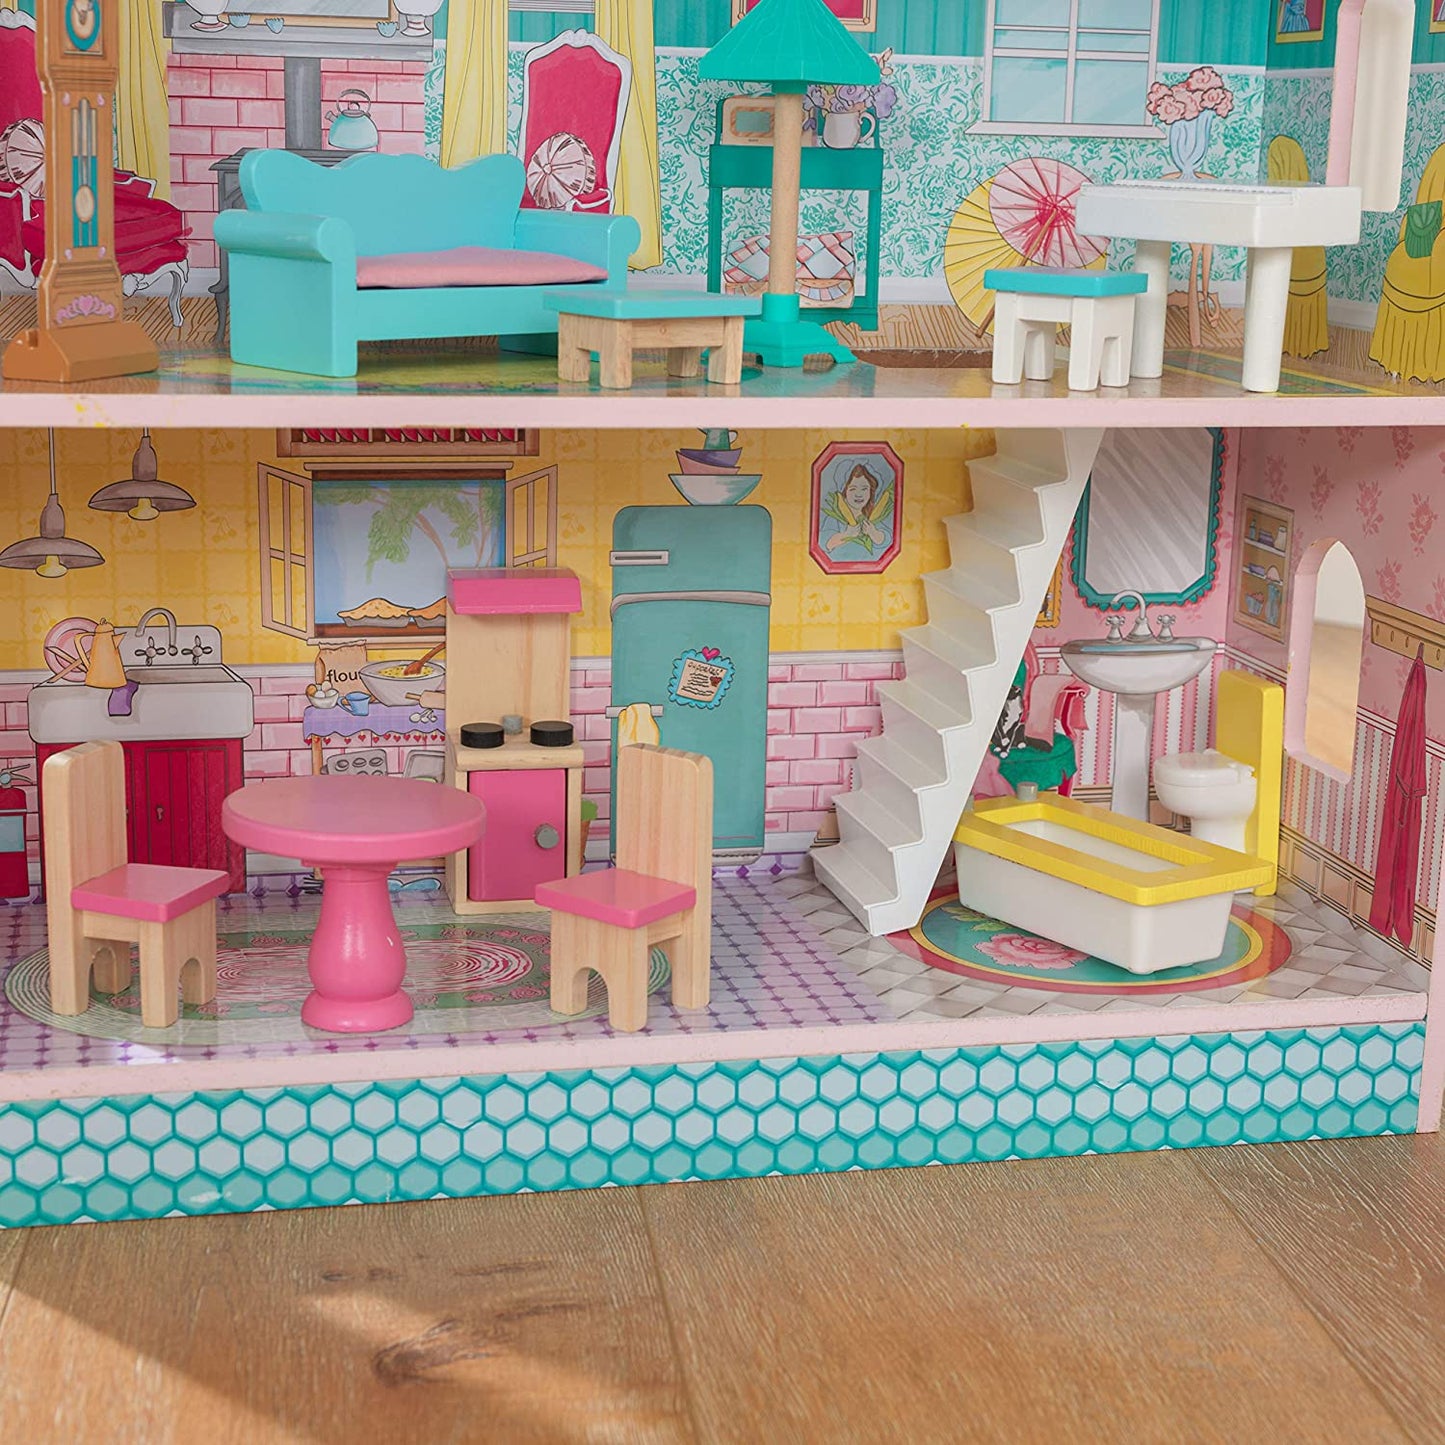 Dollhouse with Furniture for kids 71 x 60 x 33 cm (Model 4) - Little Kids Business